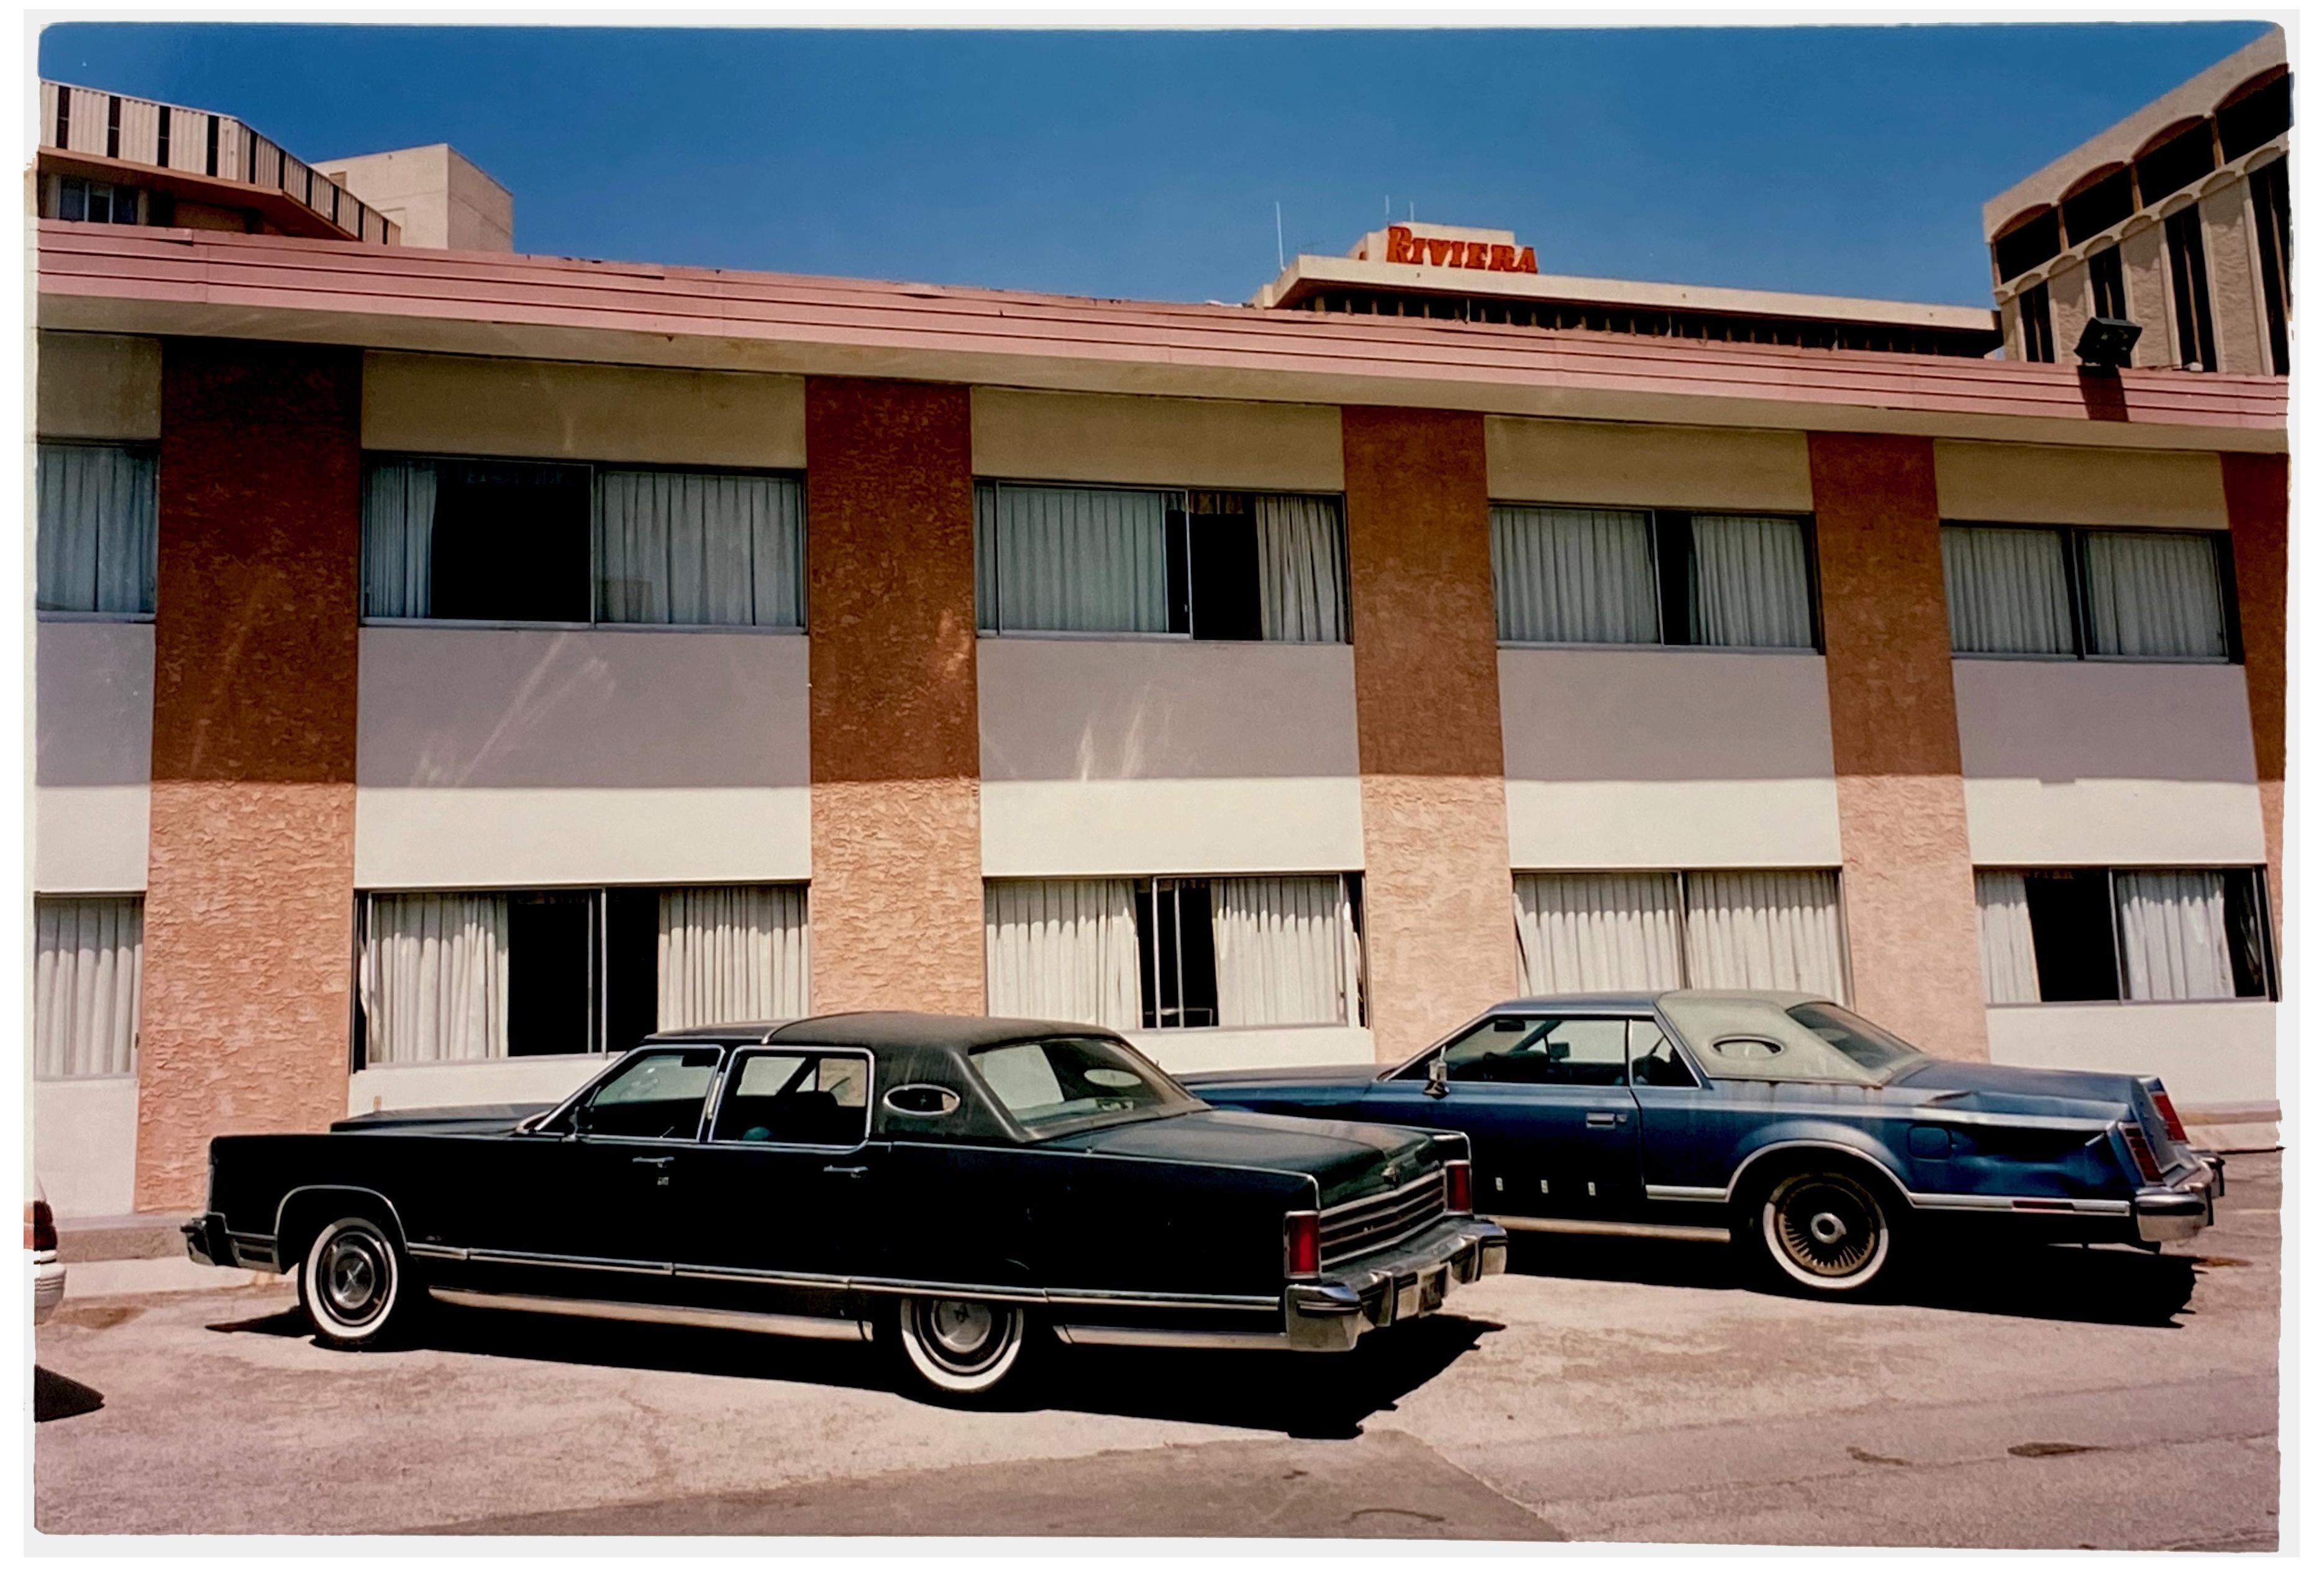 Classic Lincoln cars, parked outside the famous mid-century building, the La Concha Motel in Las Vegas. The cinematic scene of now Lost Vegas, evokes images of gangster movies. Photograph from Richard Heeps Dream in Colour series.

This artwork is a